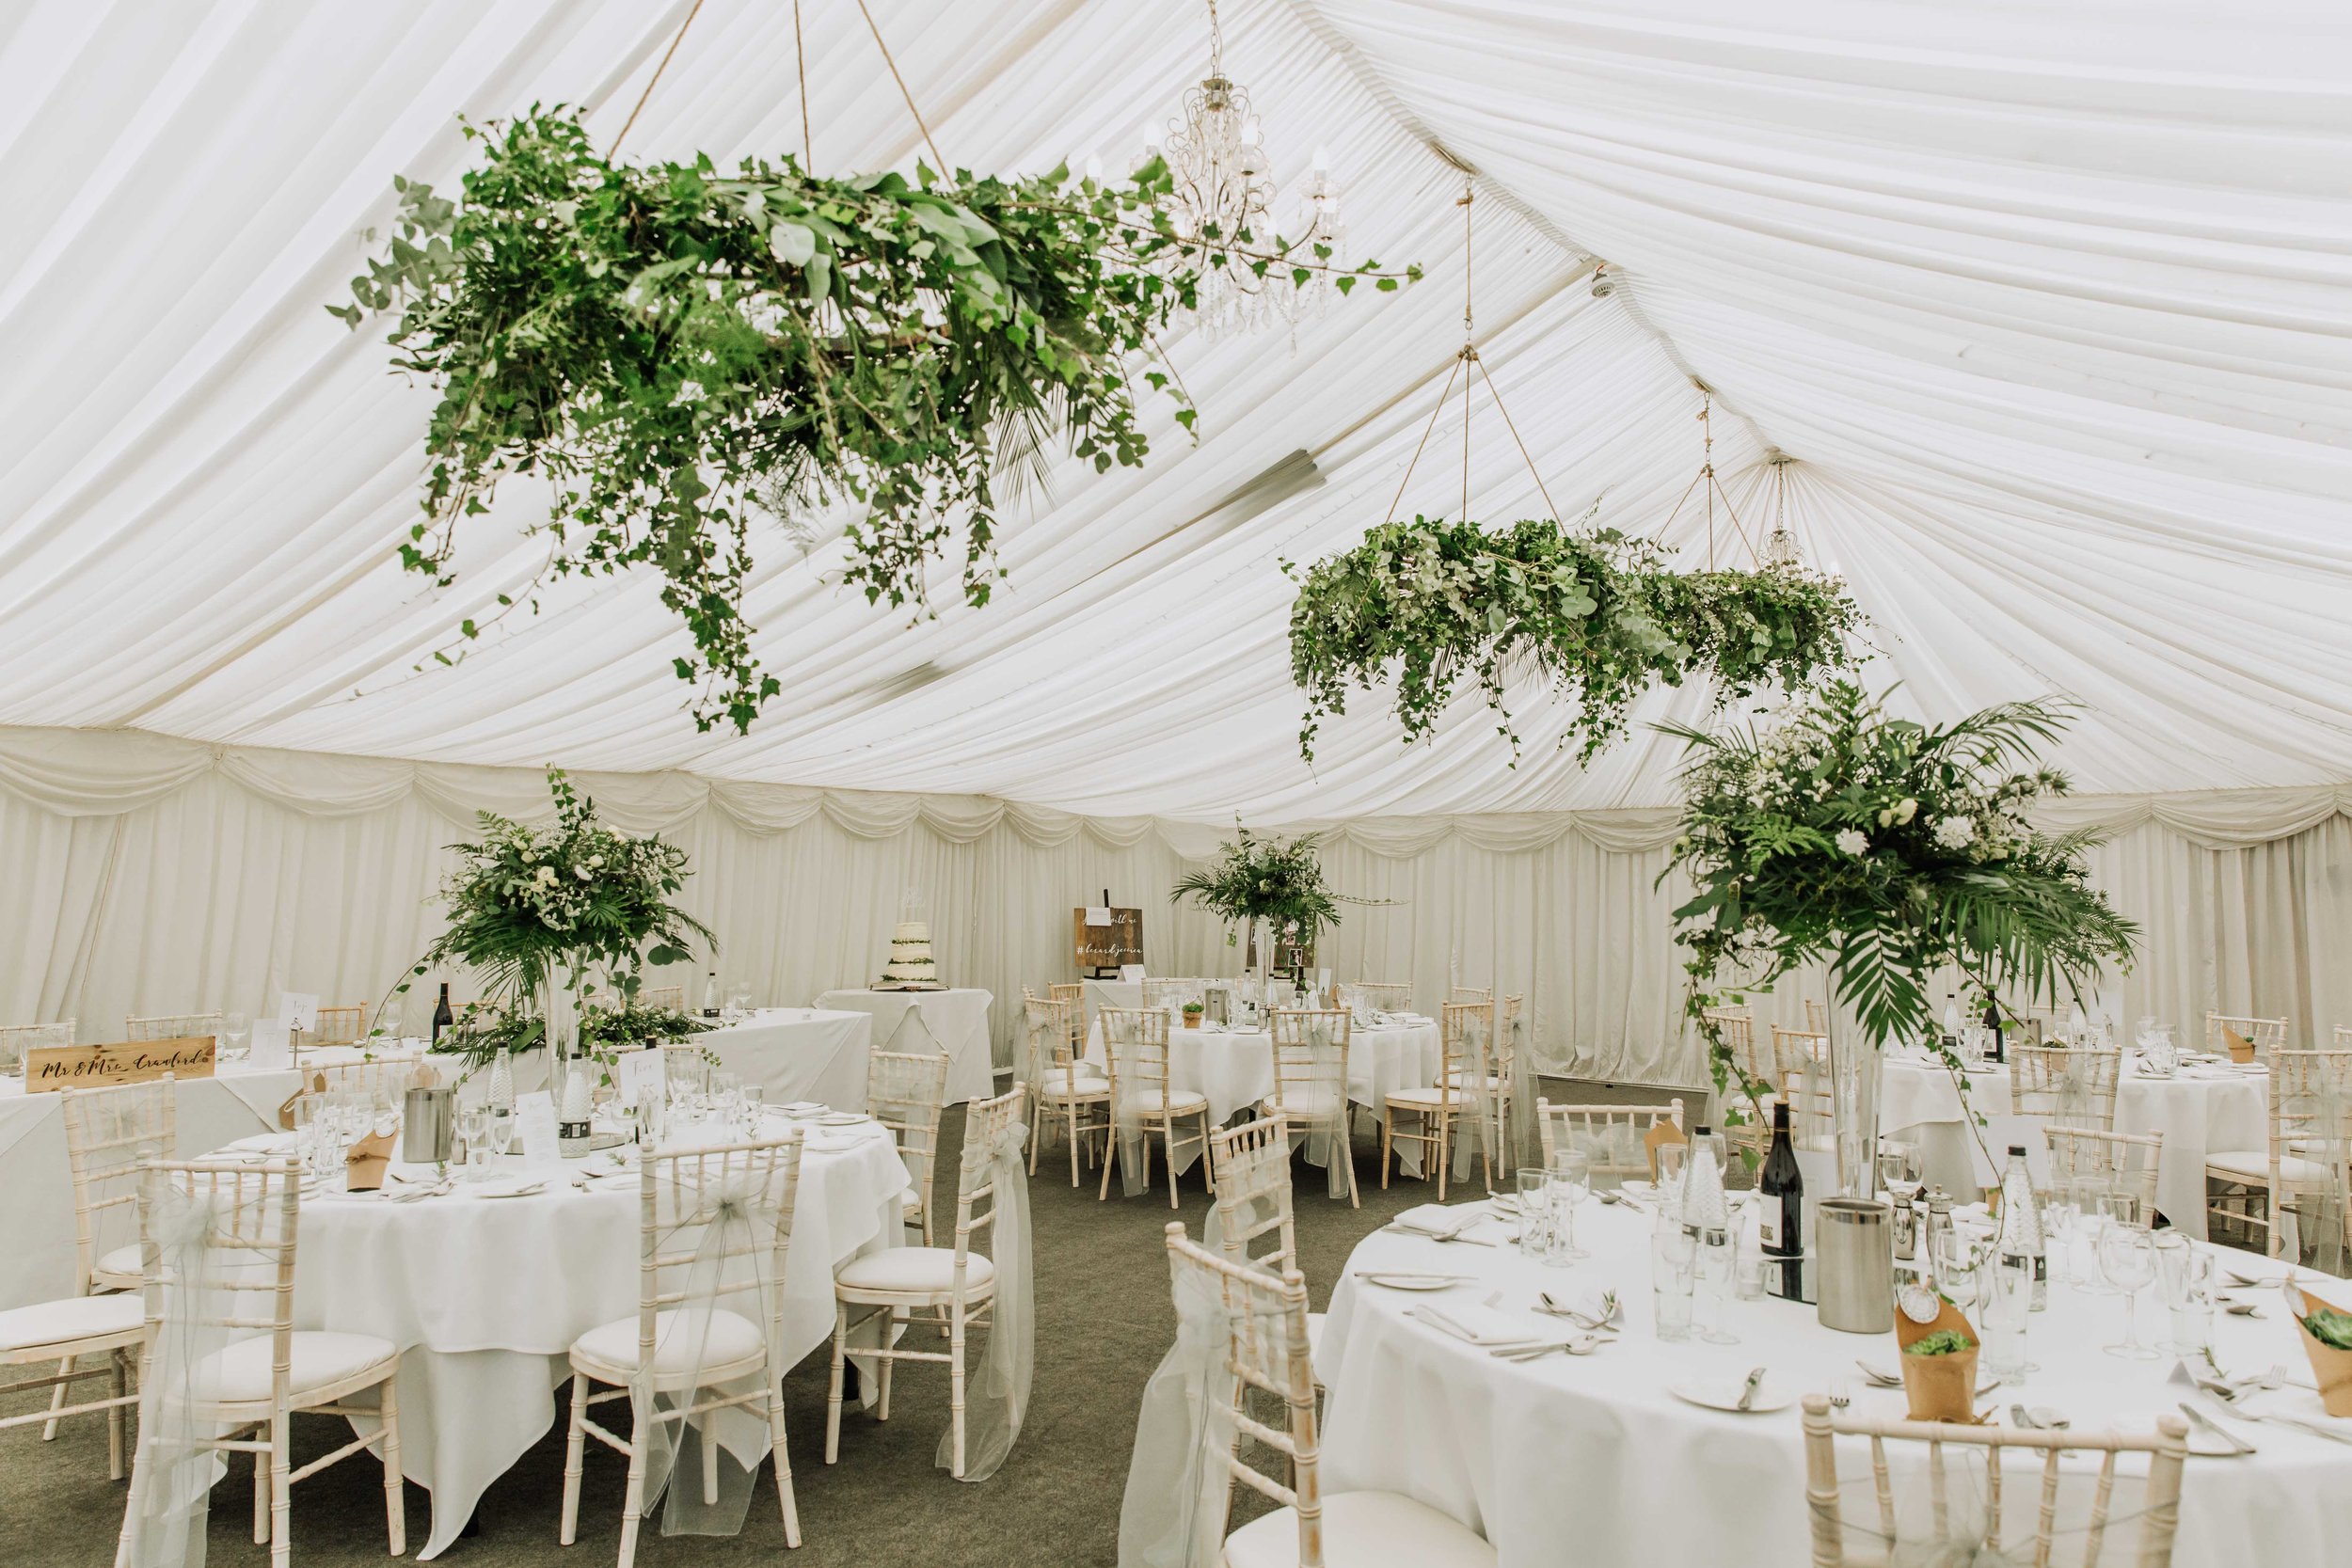 The Woodlands Hotel marquee wedding